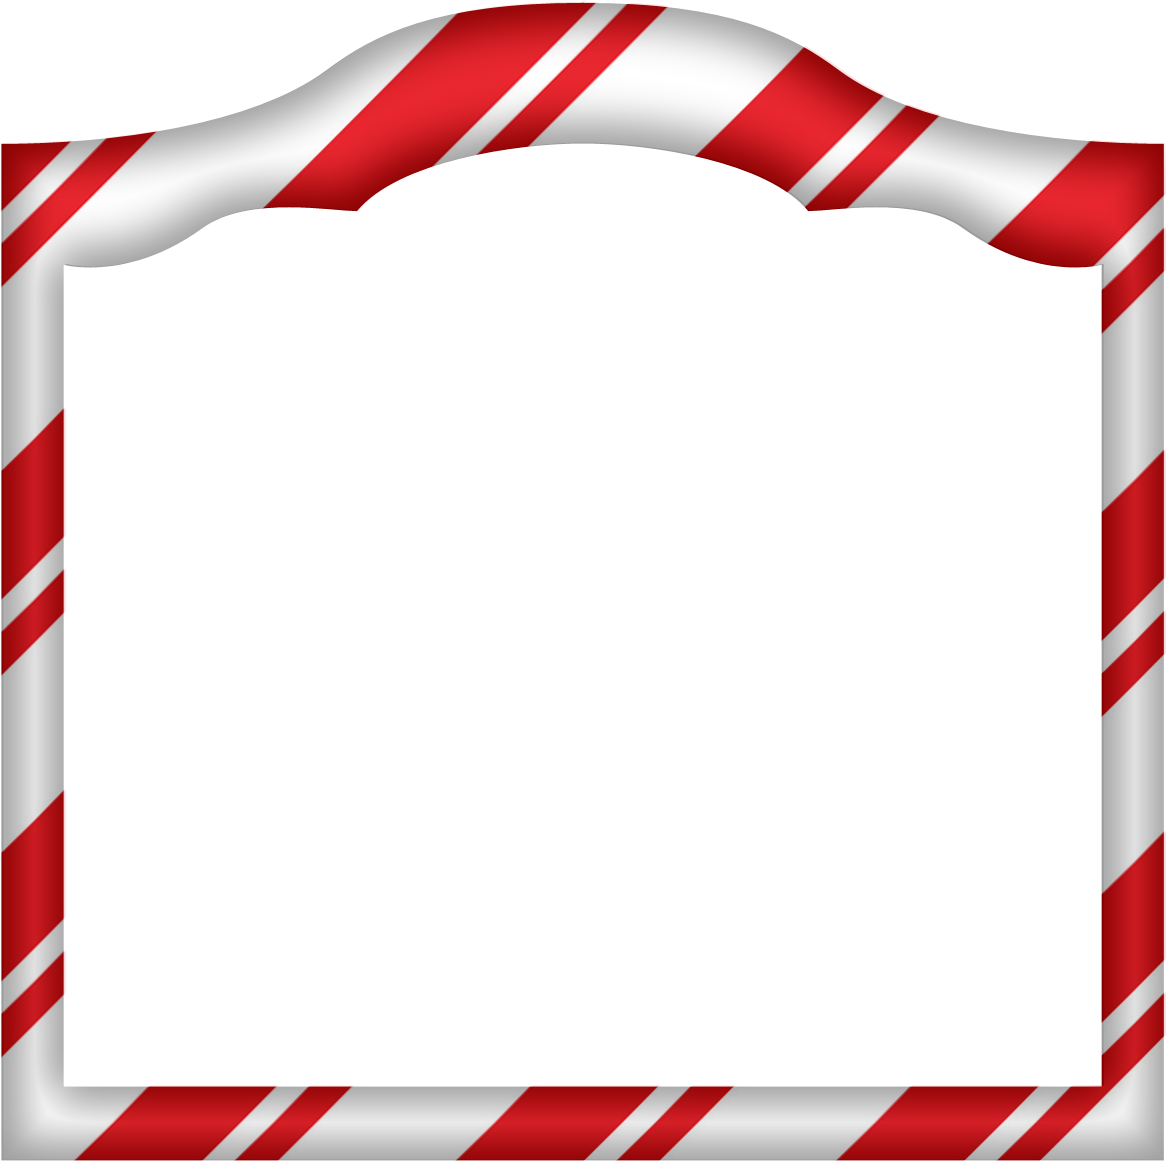 Candy Cane Themed Christmas Frame PNG image